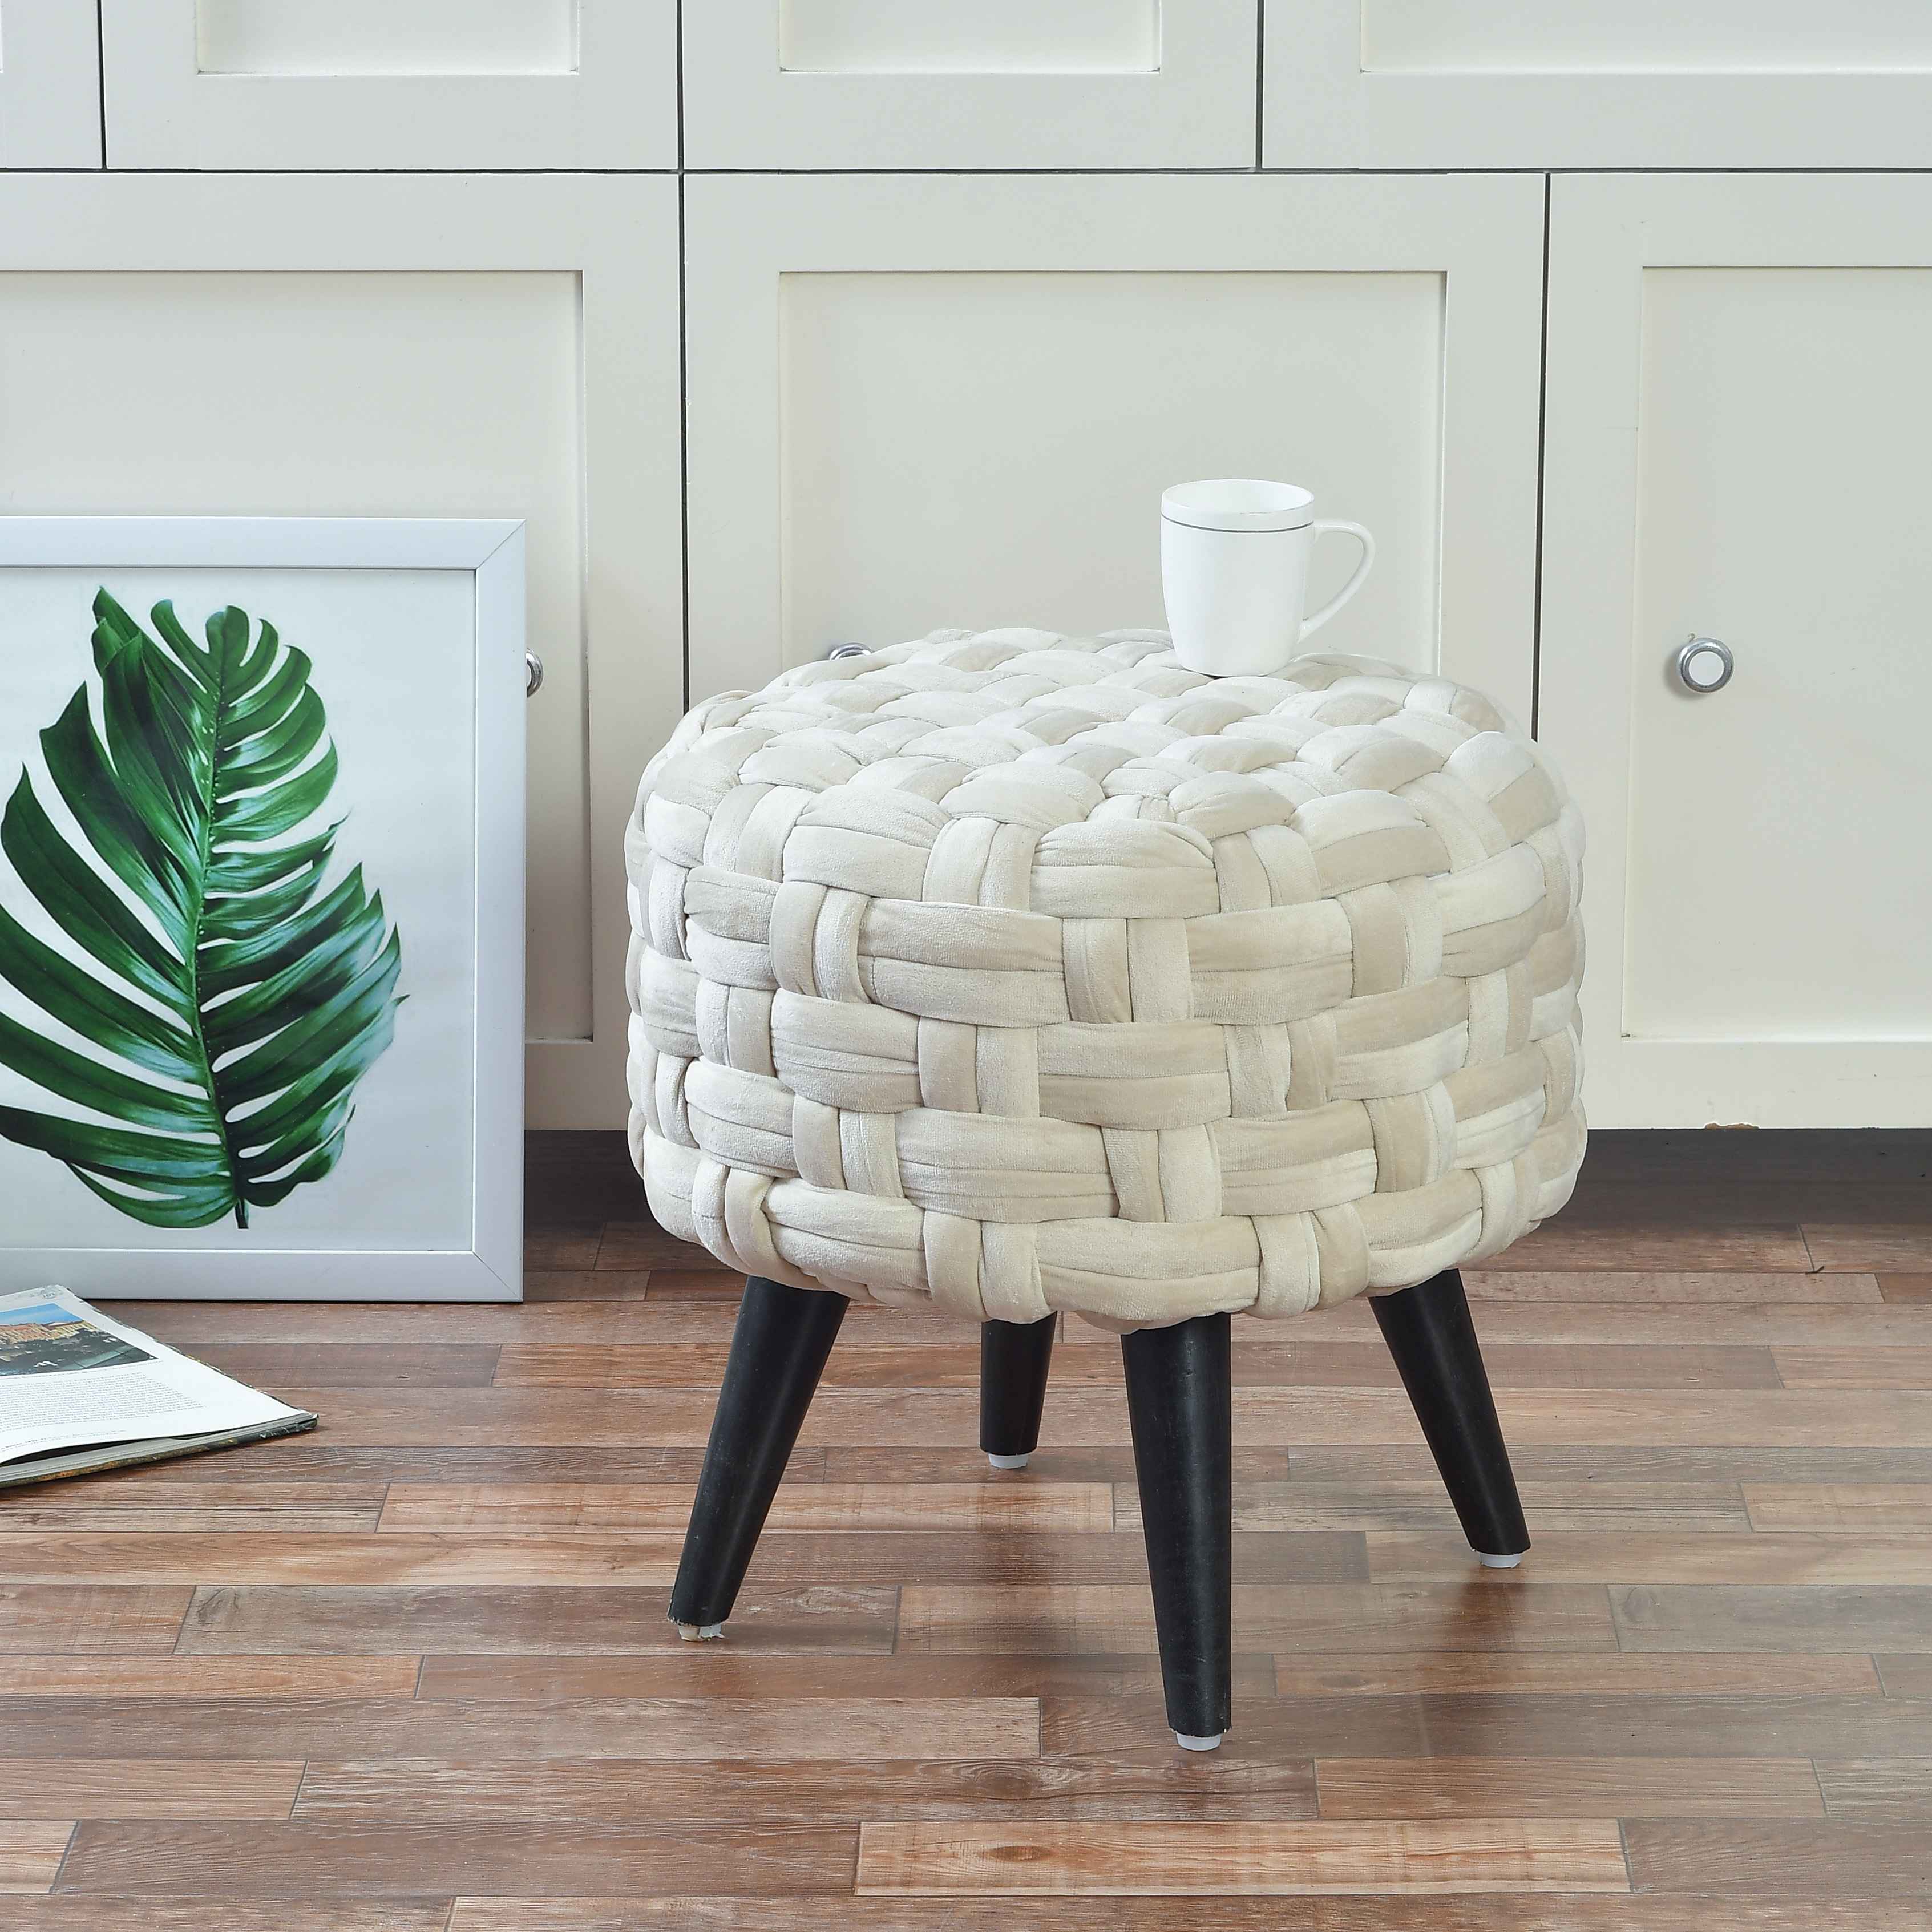 Patterned Paragon Ottomans 29